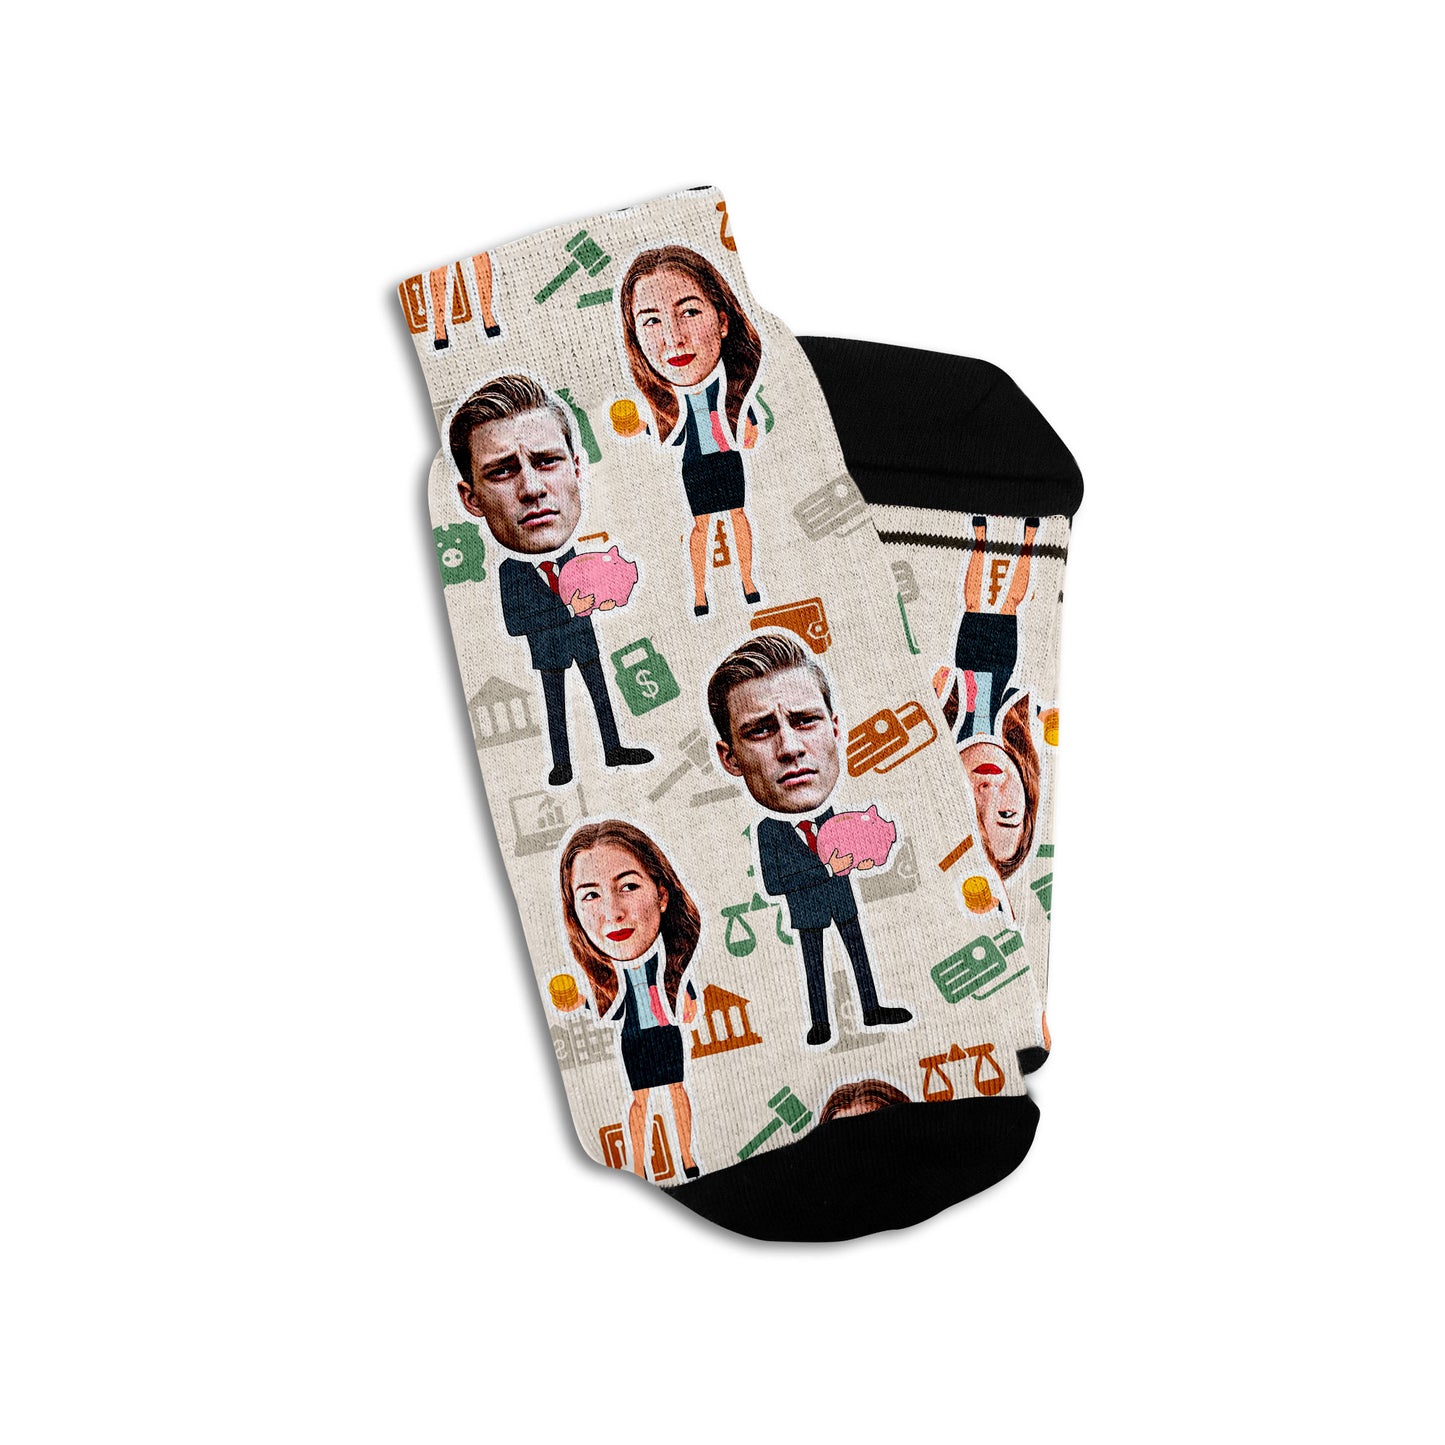 banker gift socks with baker cartoons and real people's faces